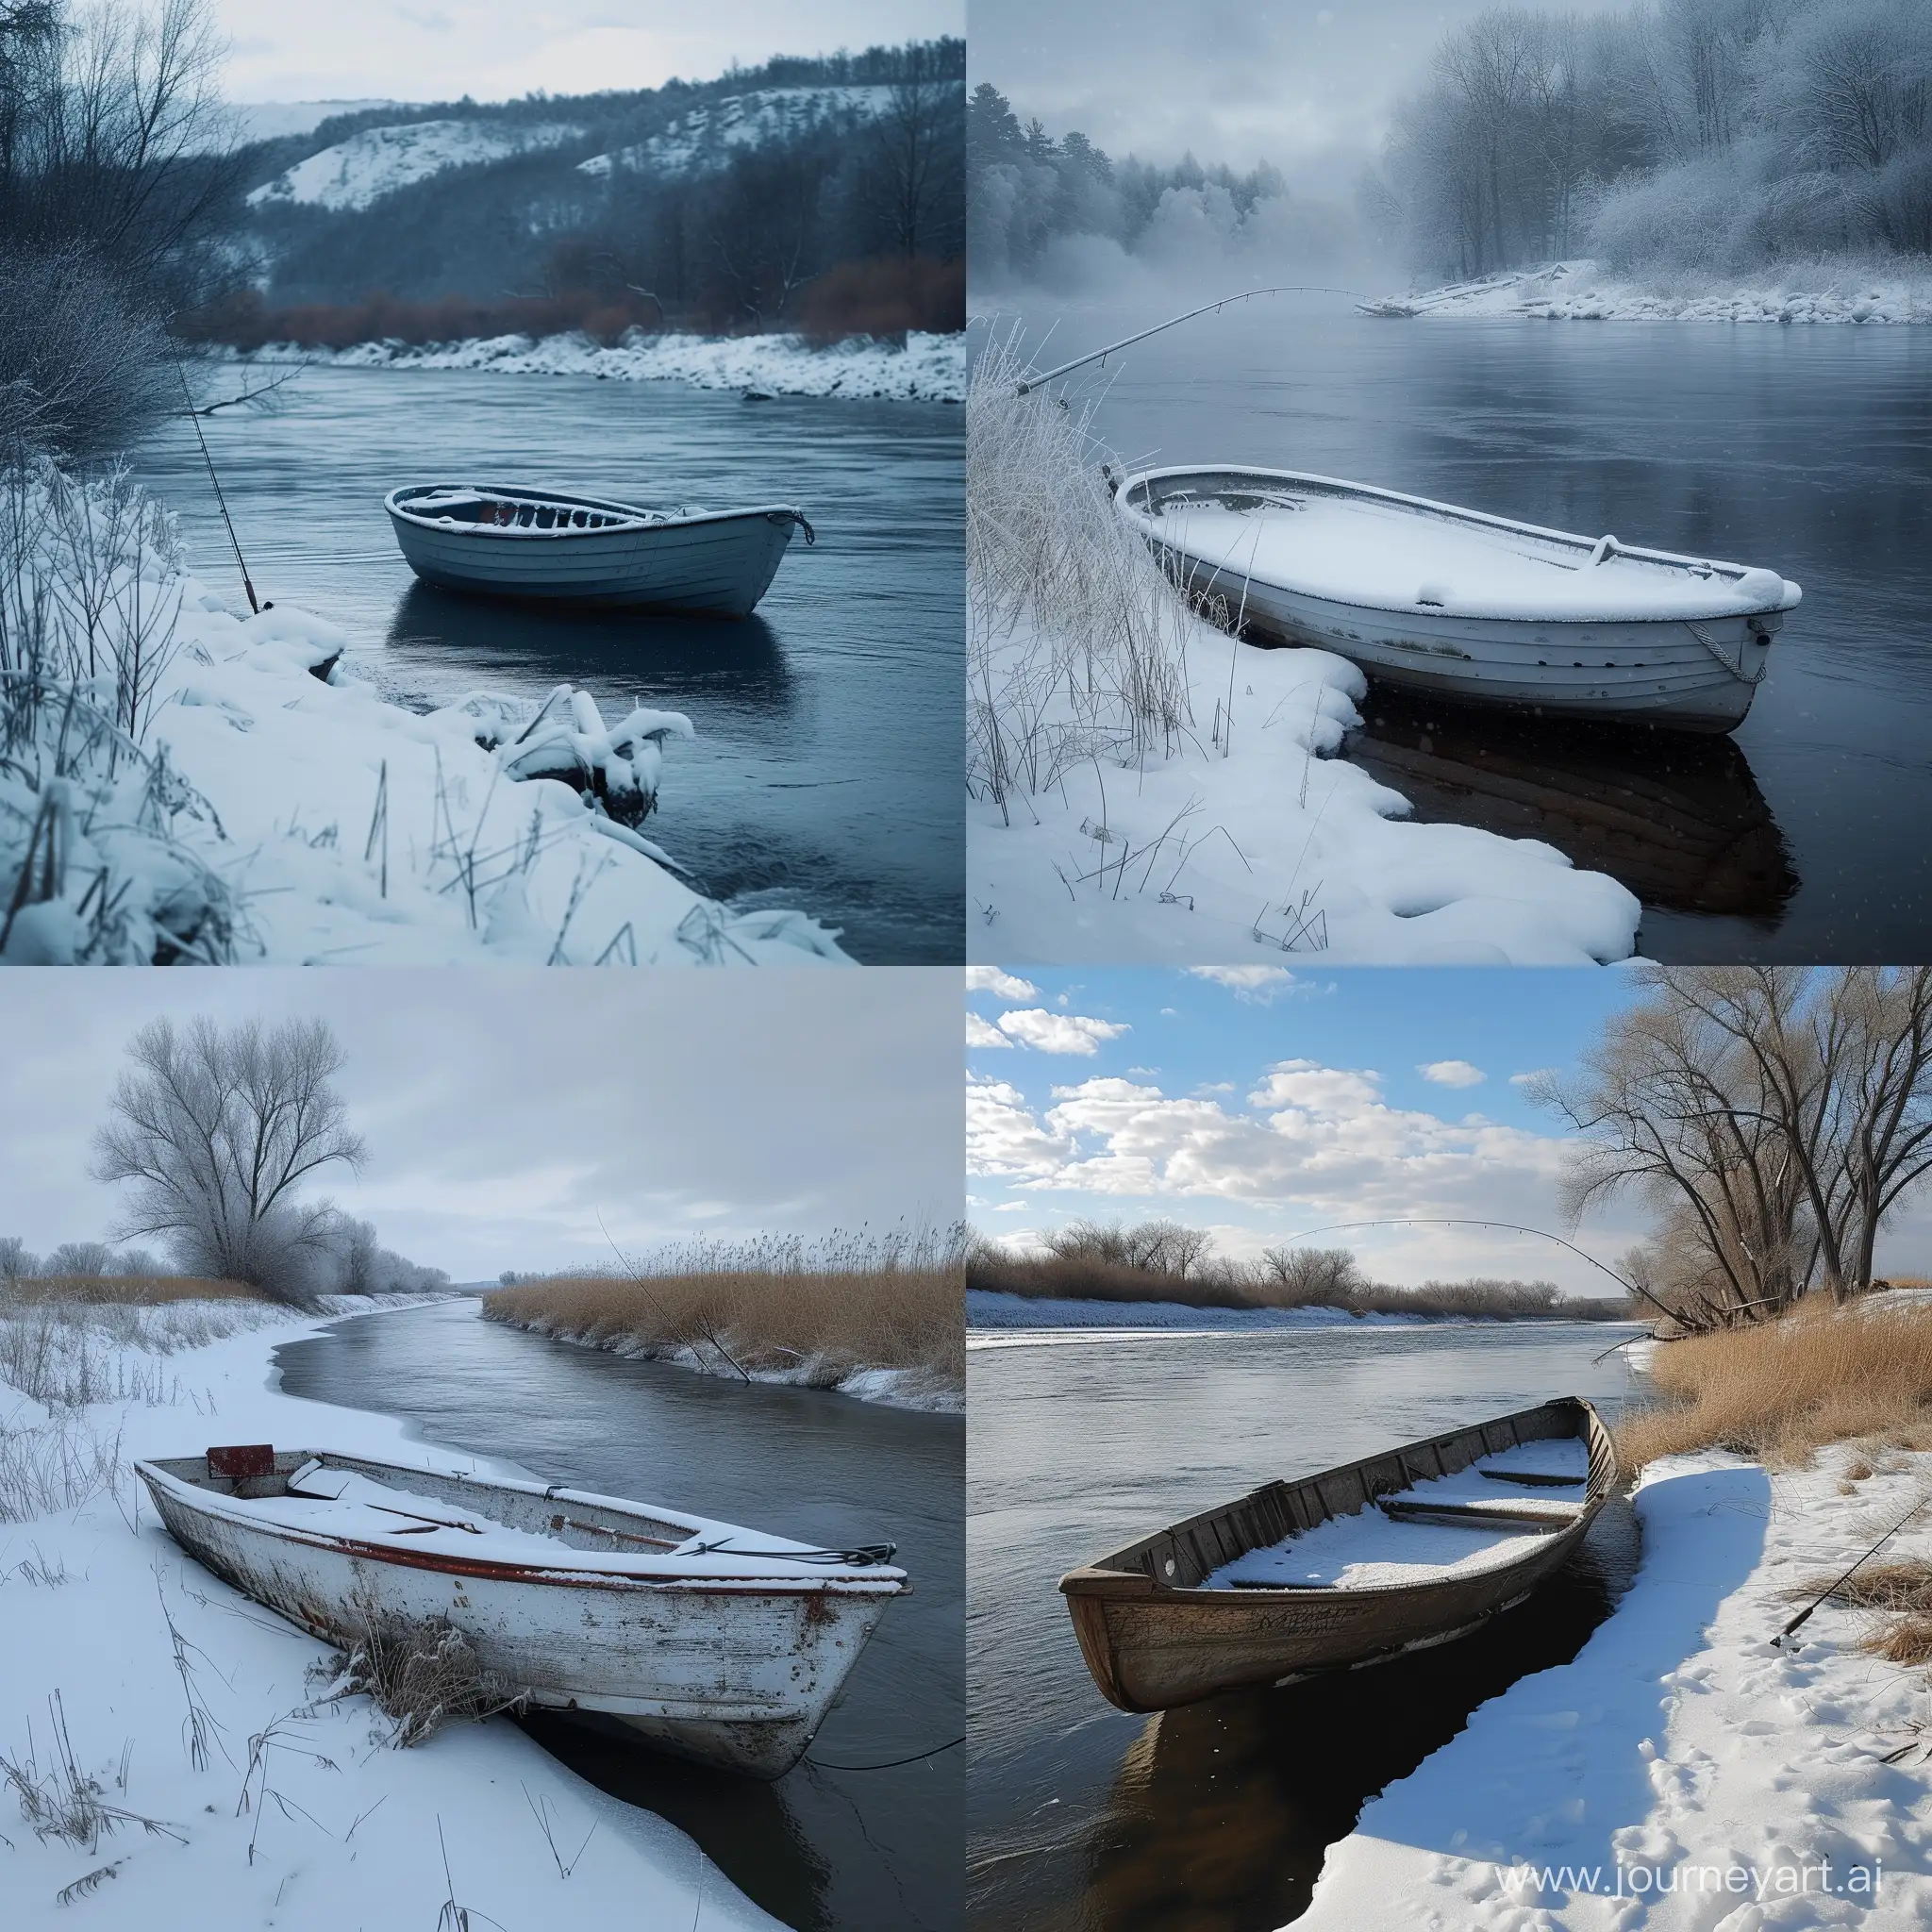 Solitary-Fishing-Boat-in-Snowy-River